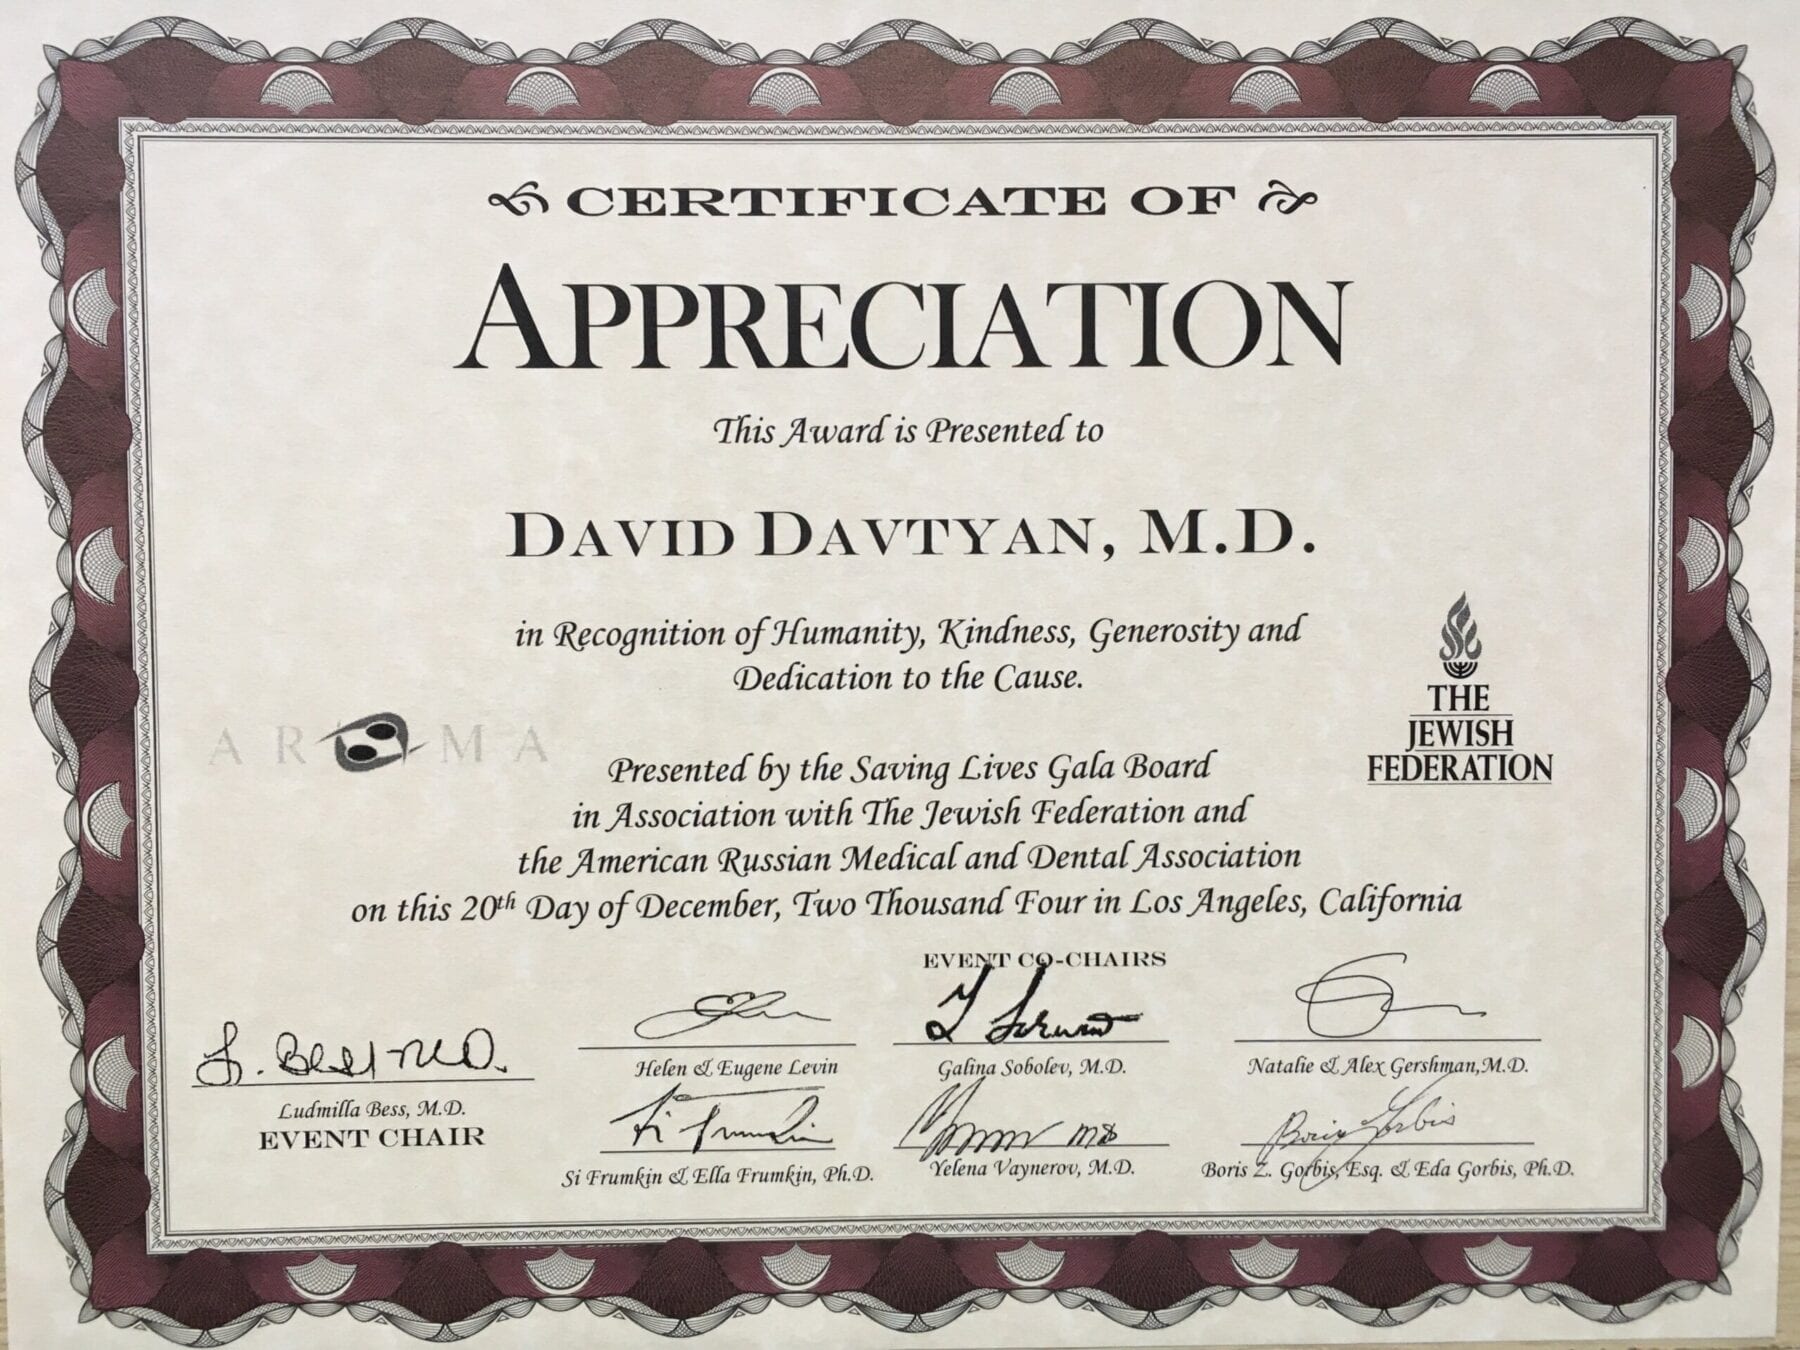 Certificate Of Appreciation For Dr. David G. Davtyan For Saving Lives Gala Board In Association With The Jewish Federation And The American Russian Medical Ad Dental Association